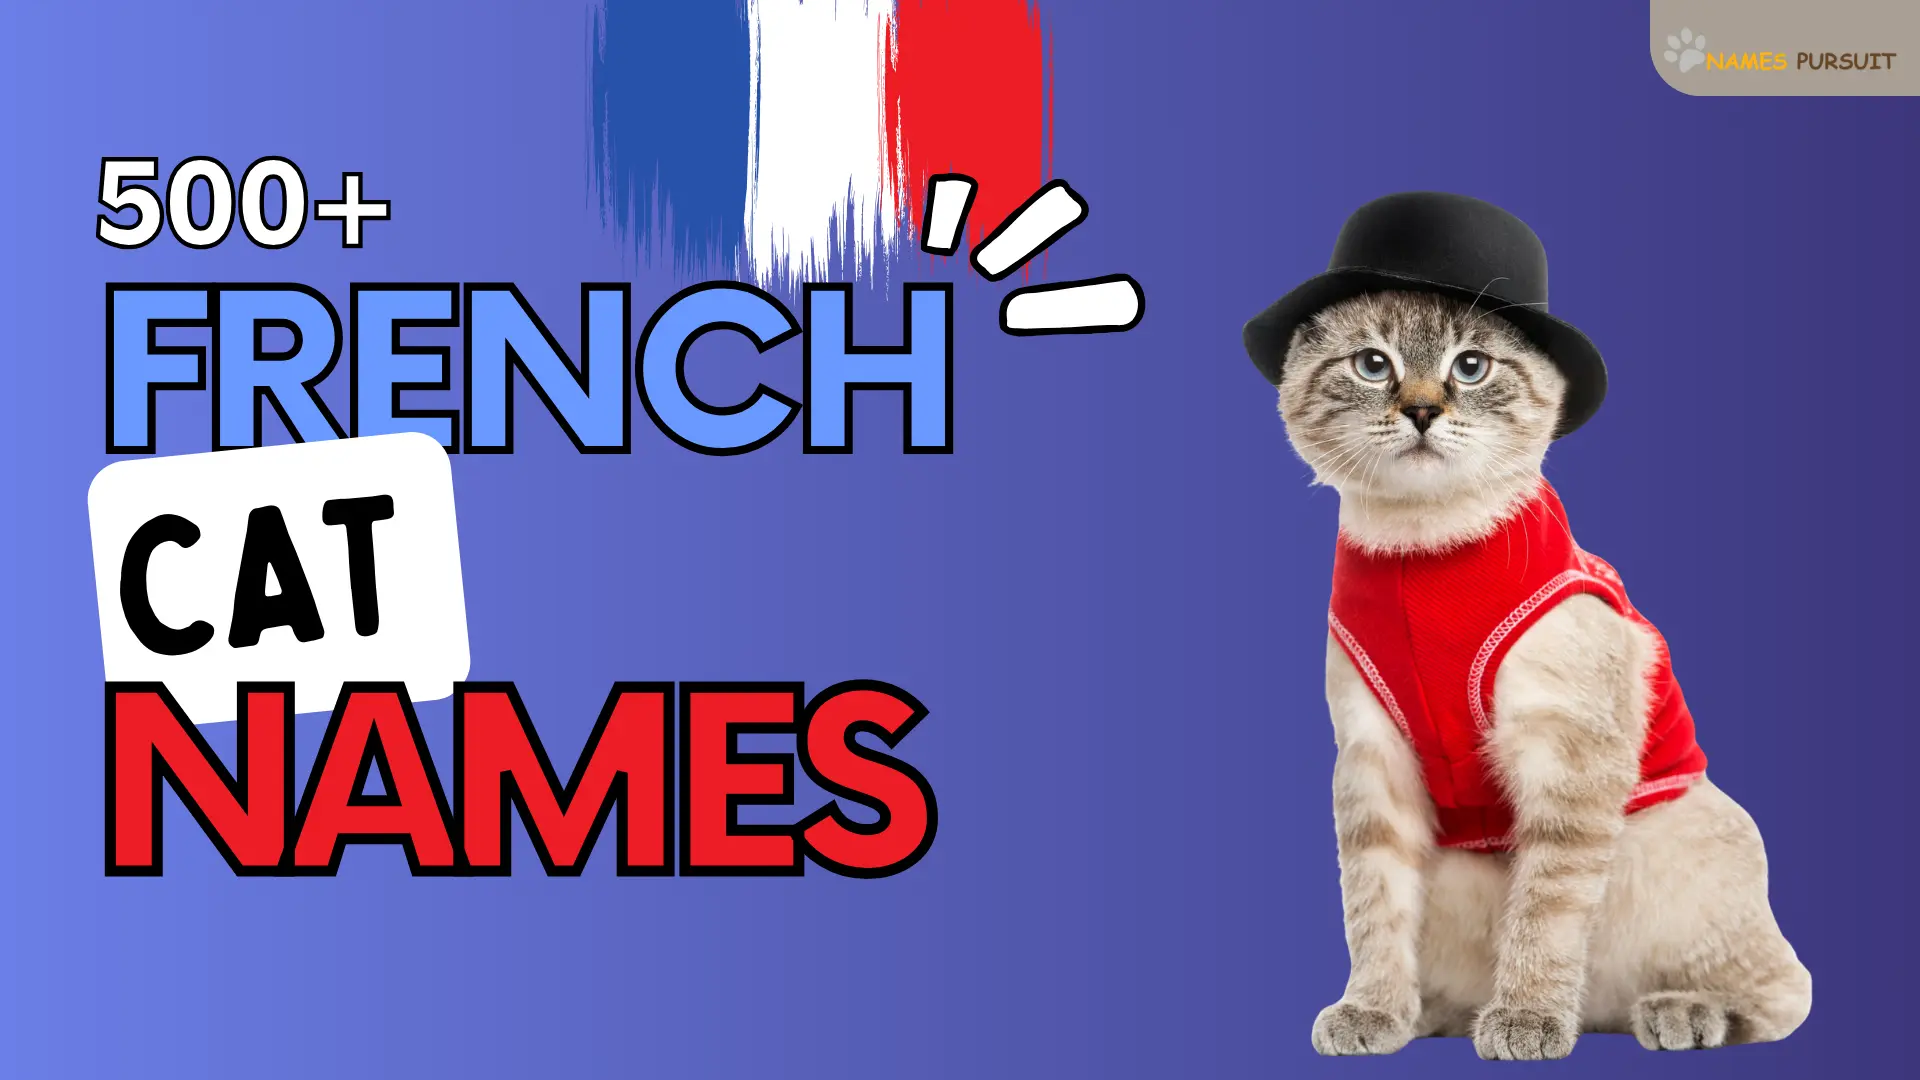 French Cat Names - names pursuit